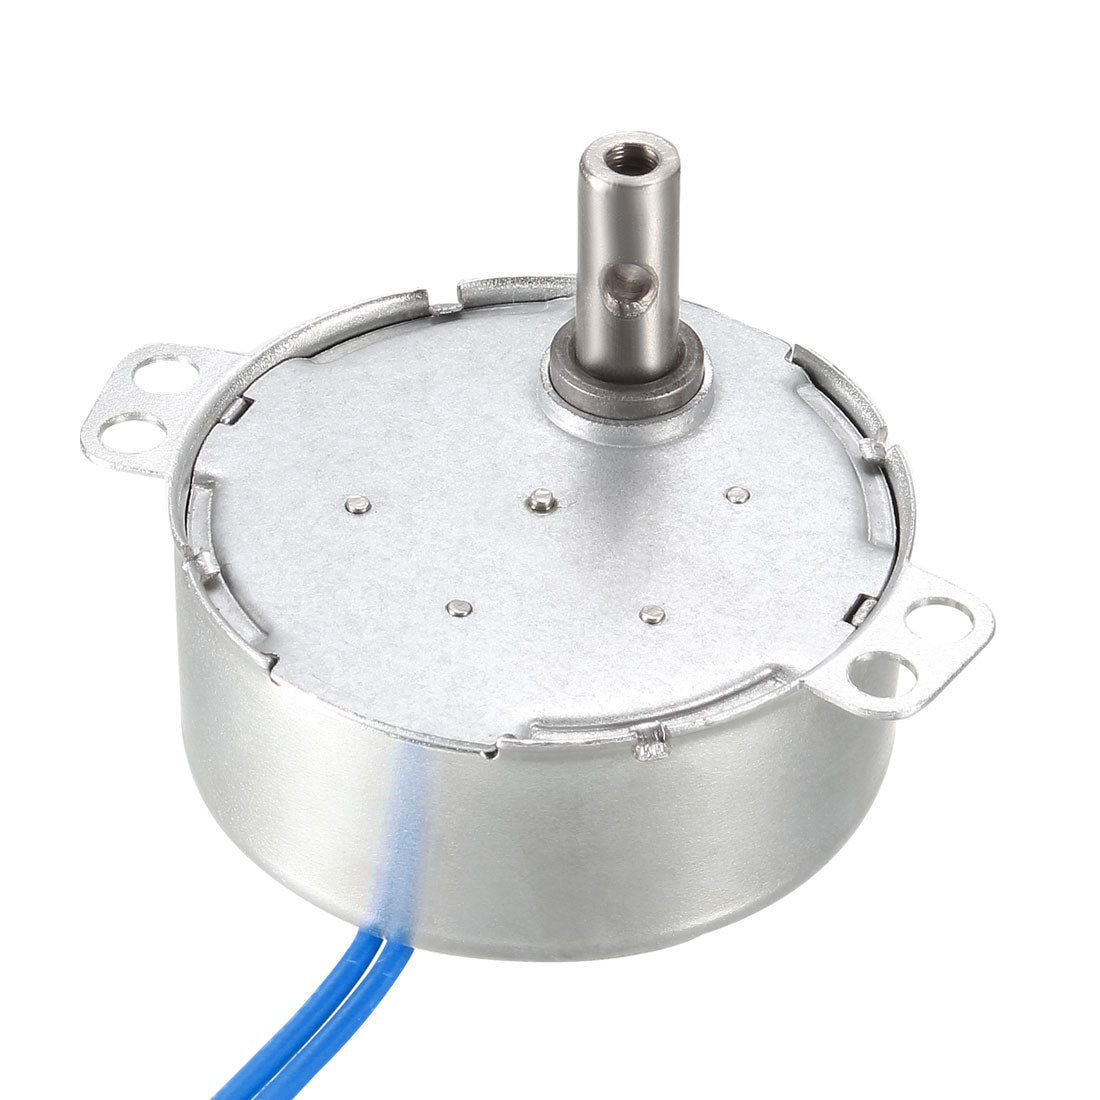 uxcell Uxcell Electric Synchron Motor Turntable Synchronous Motor 100-127 VAC 5-6RPM 50-60 Hz 4W CCW Direction for Hand-Made, Model or Guide Motor